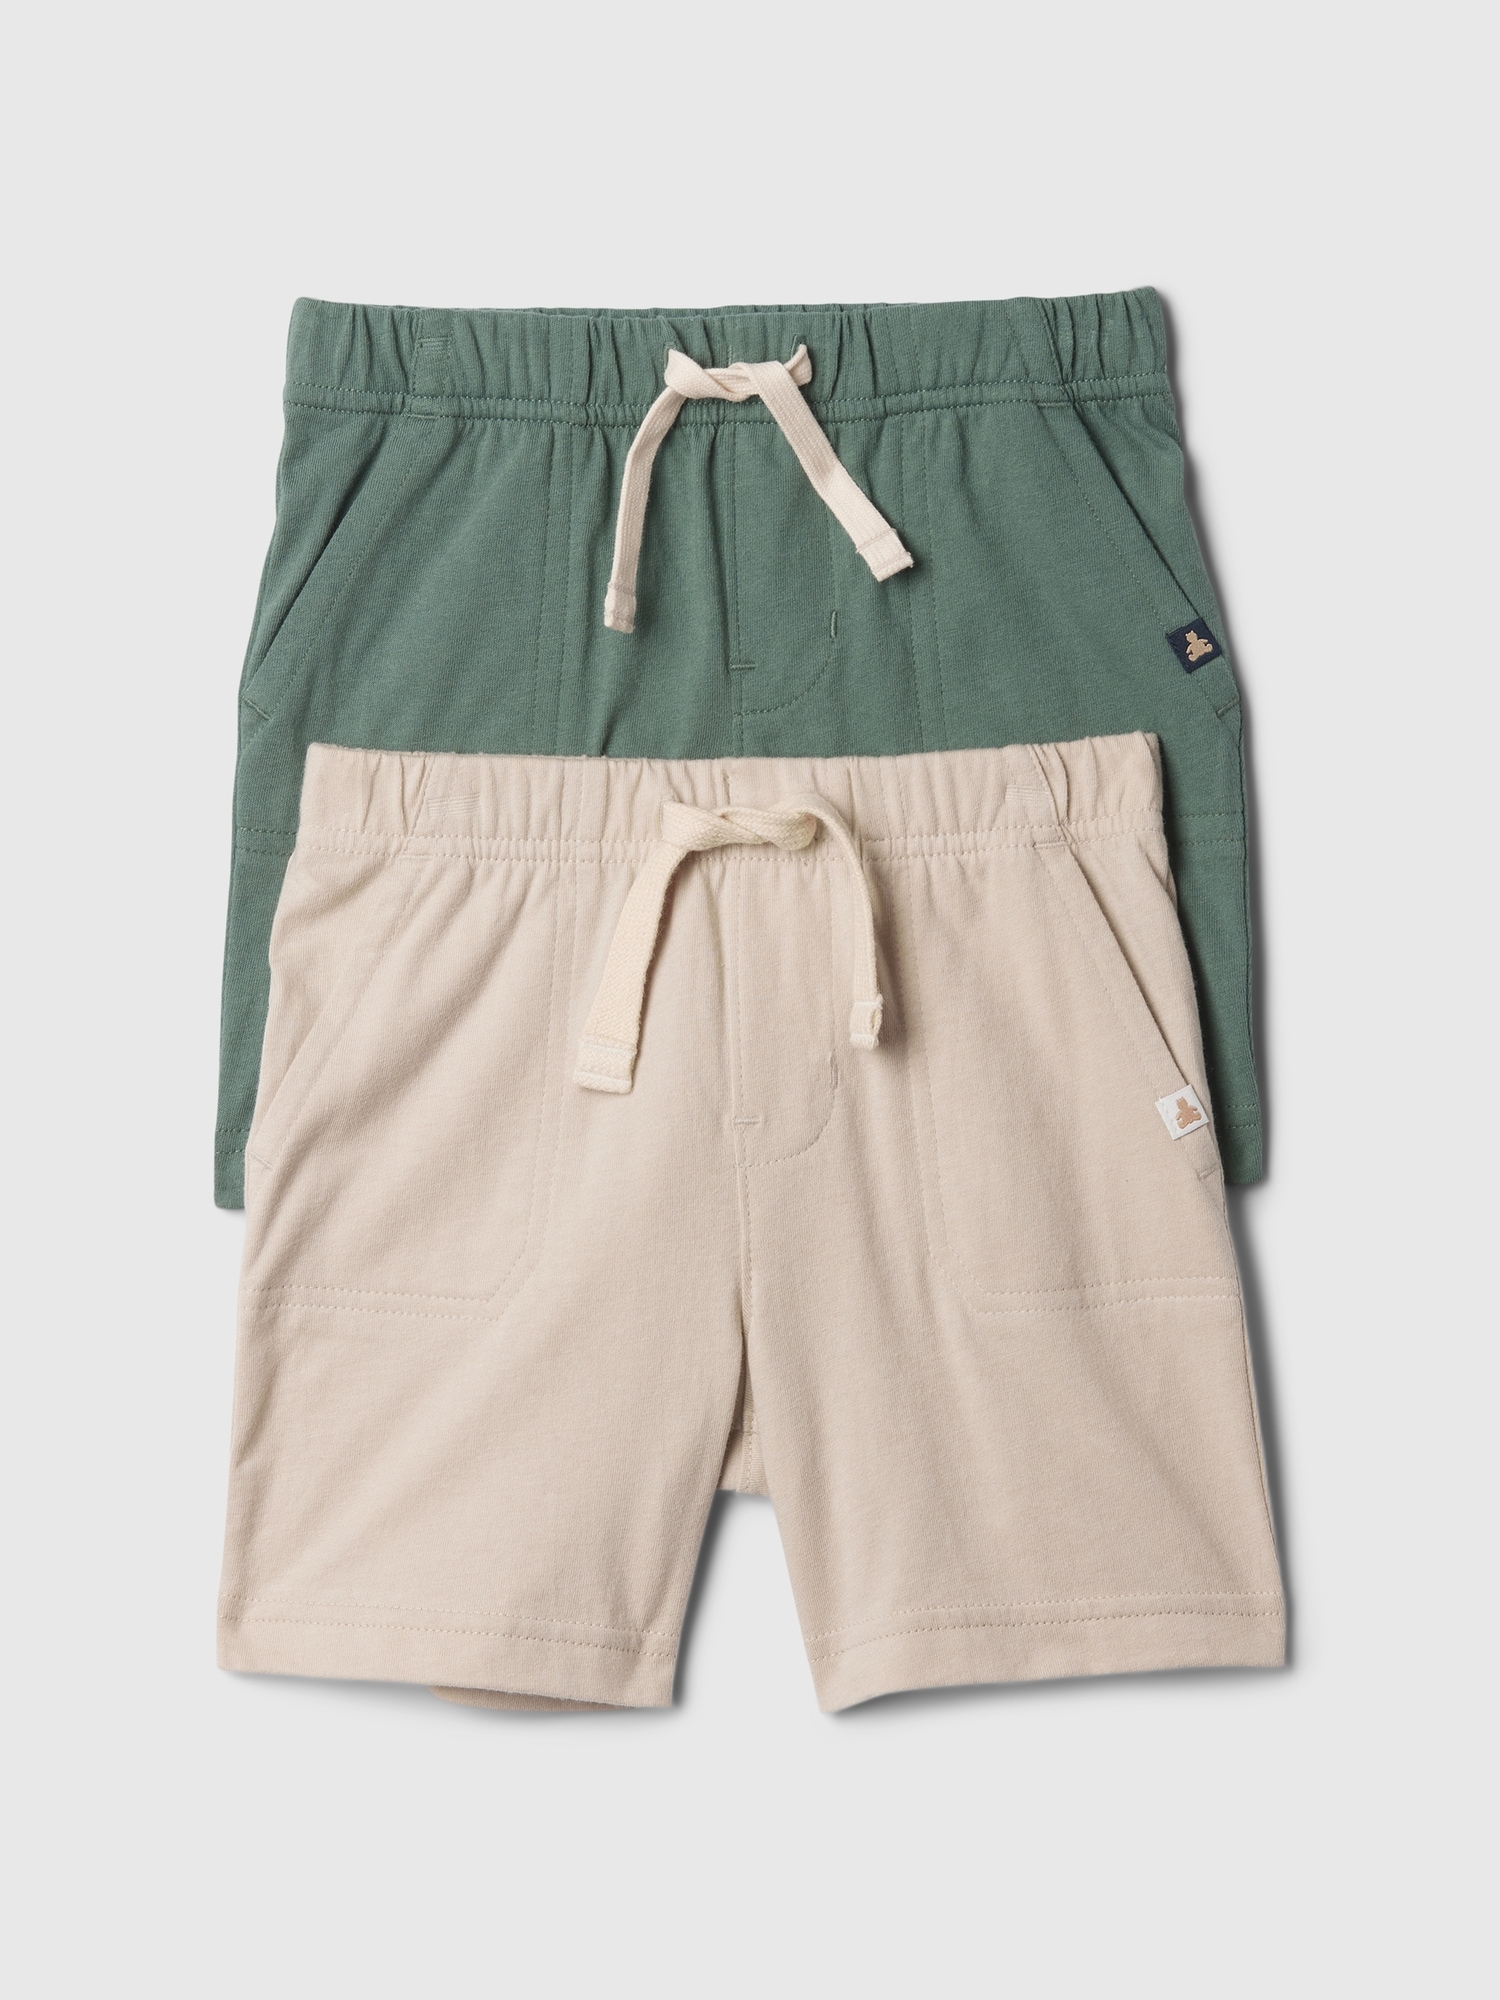 babyGap Mix and Match Shorts (2-Pack)